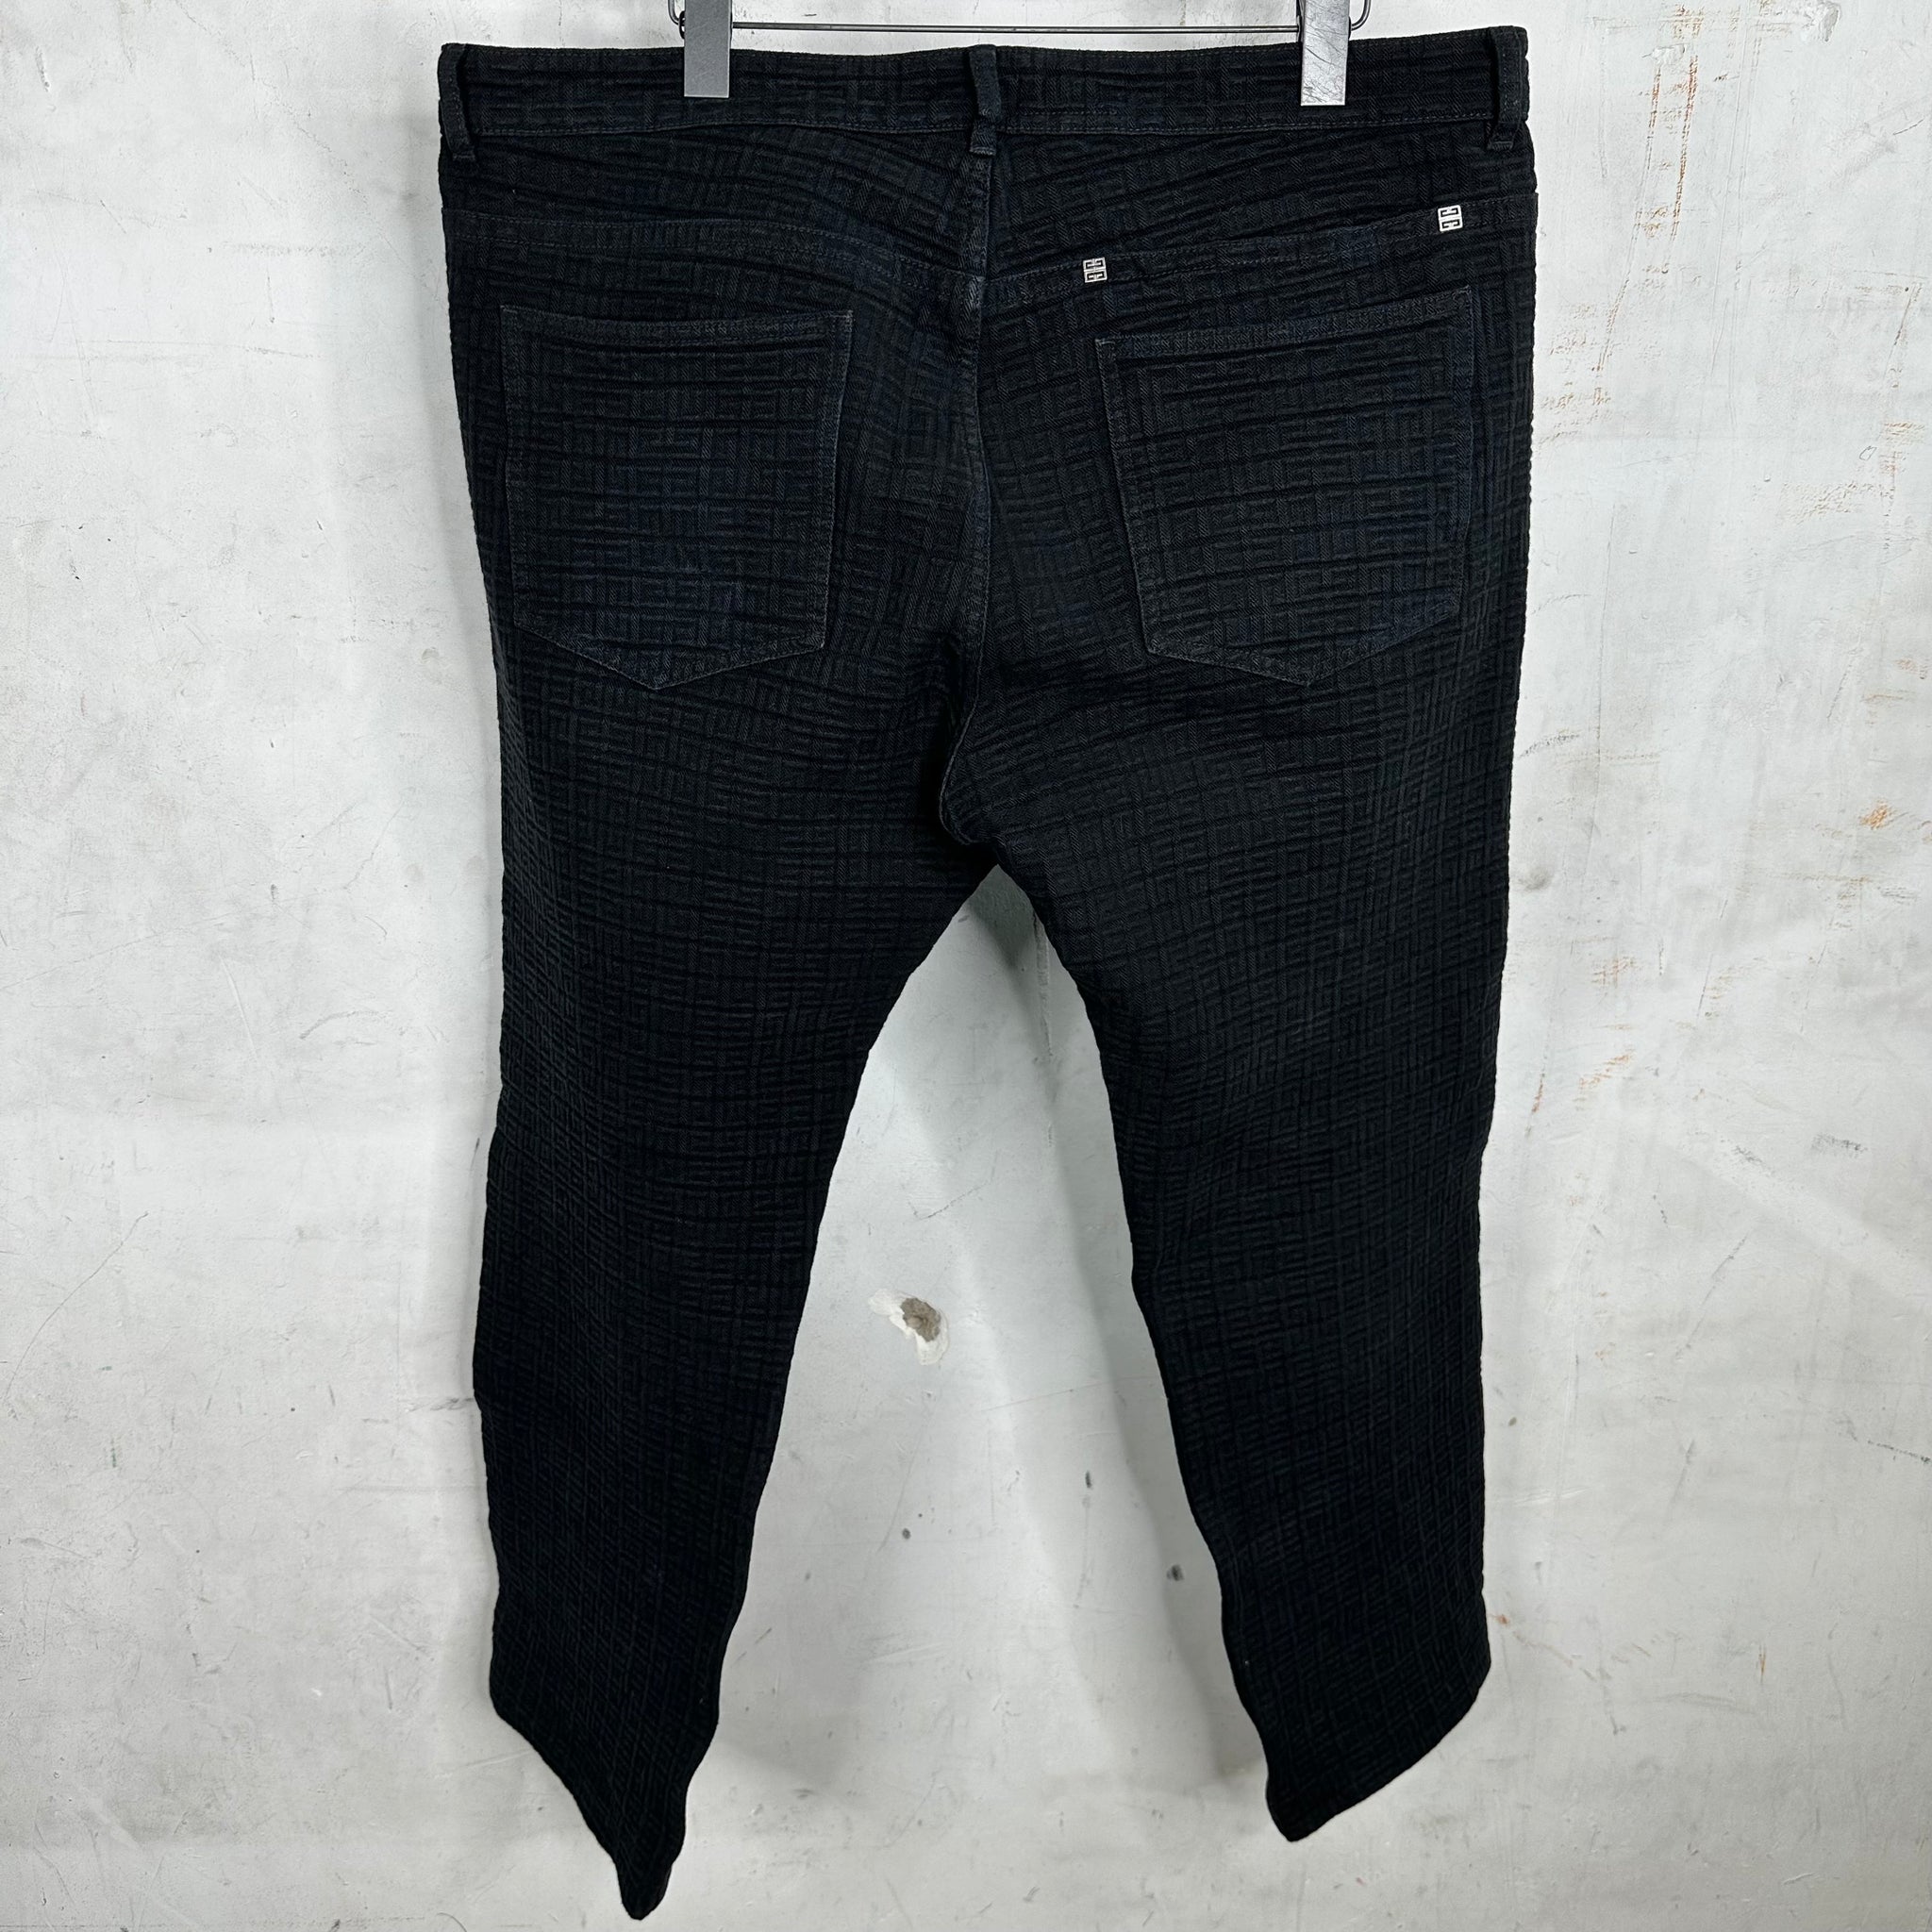 Givenchy Textured Monogram Jeans